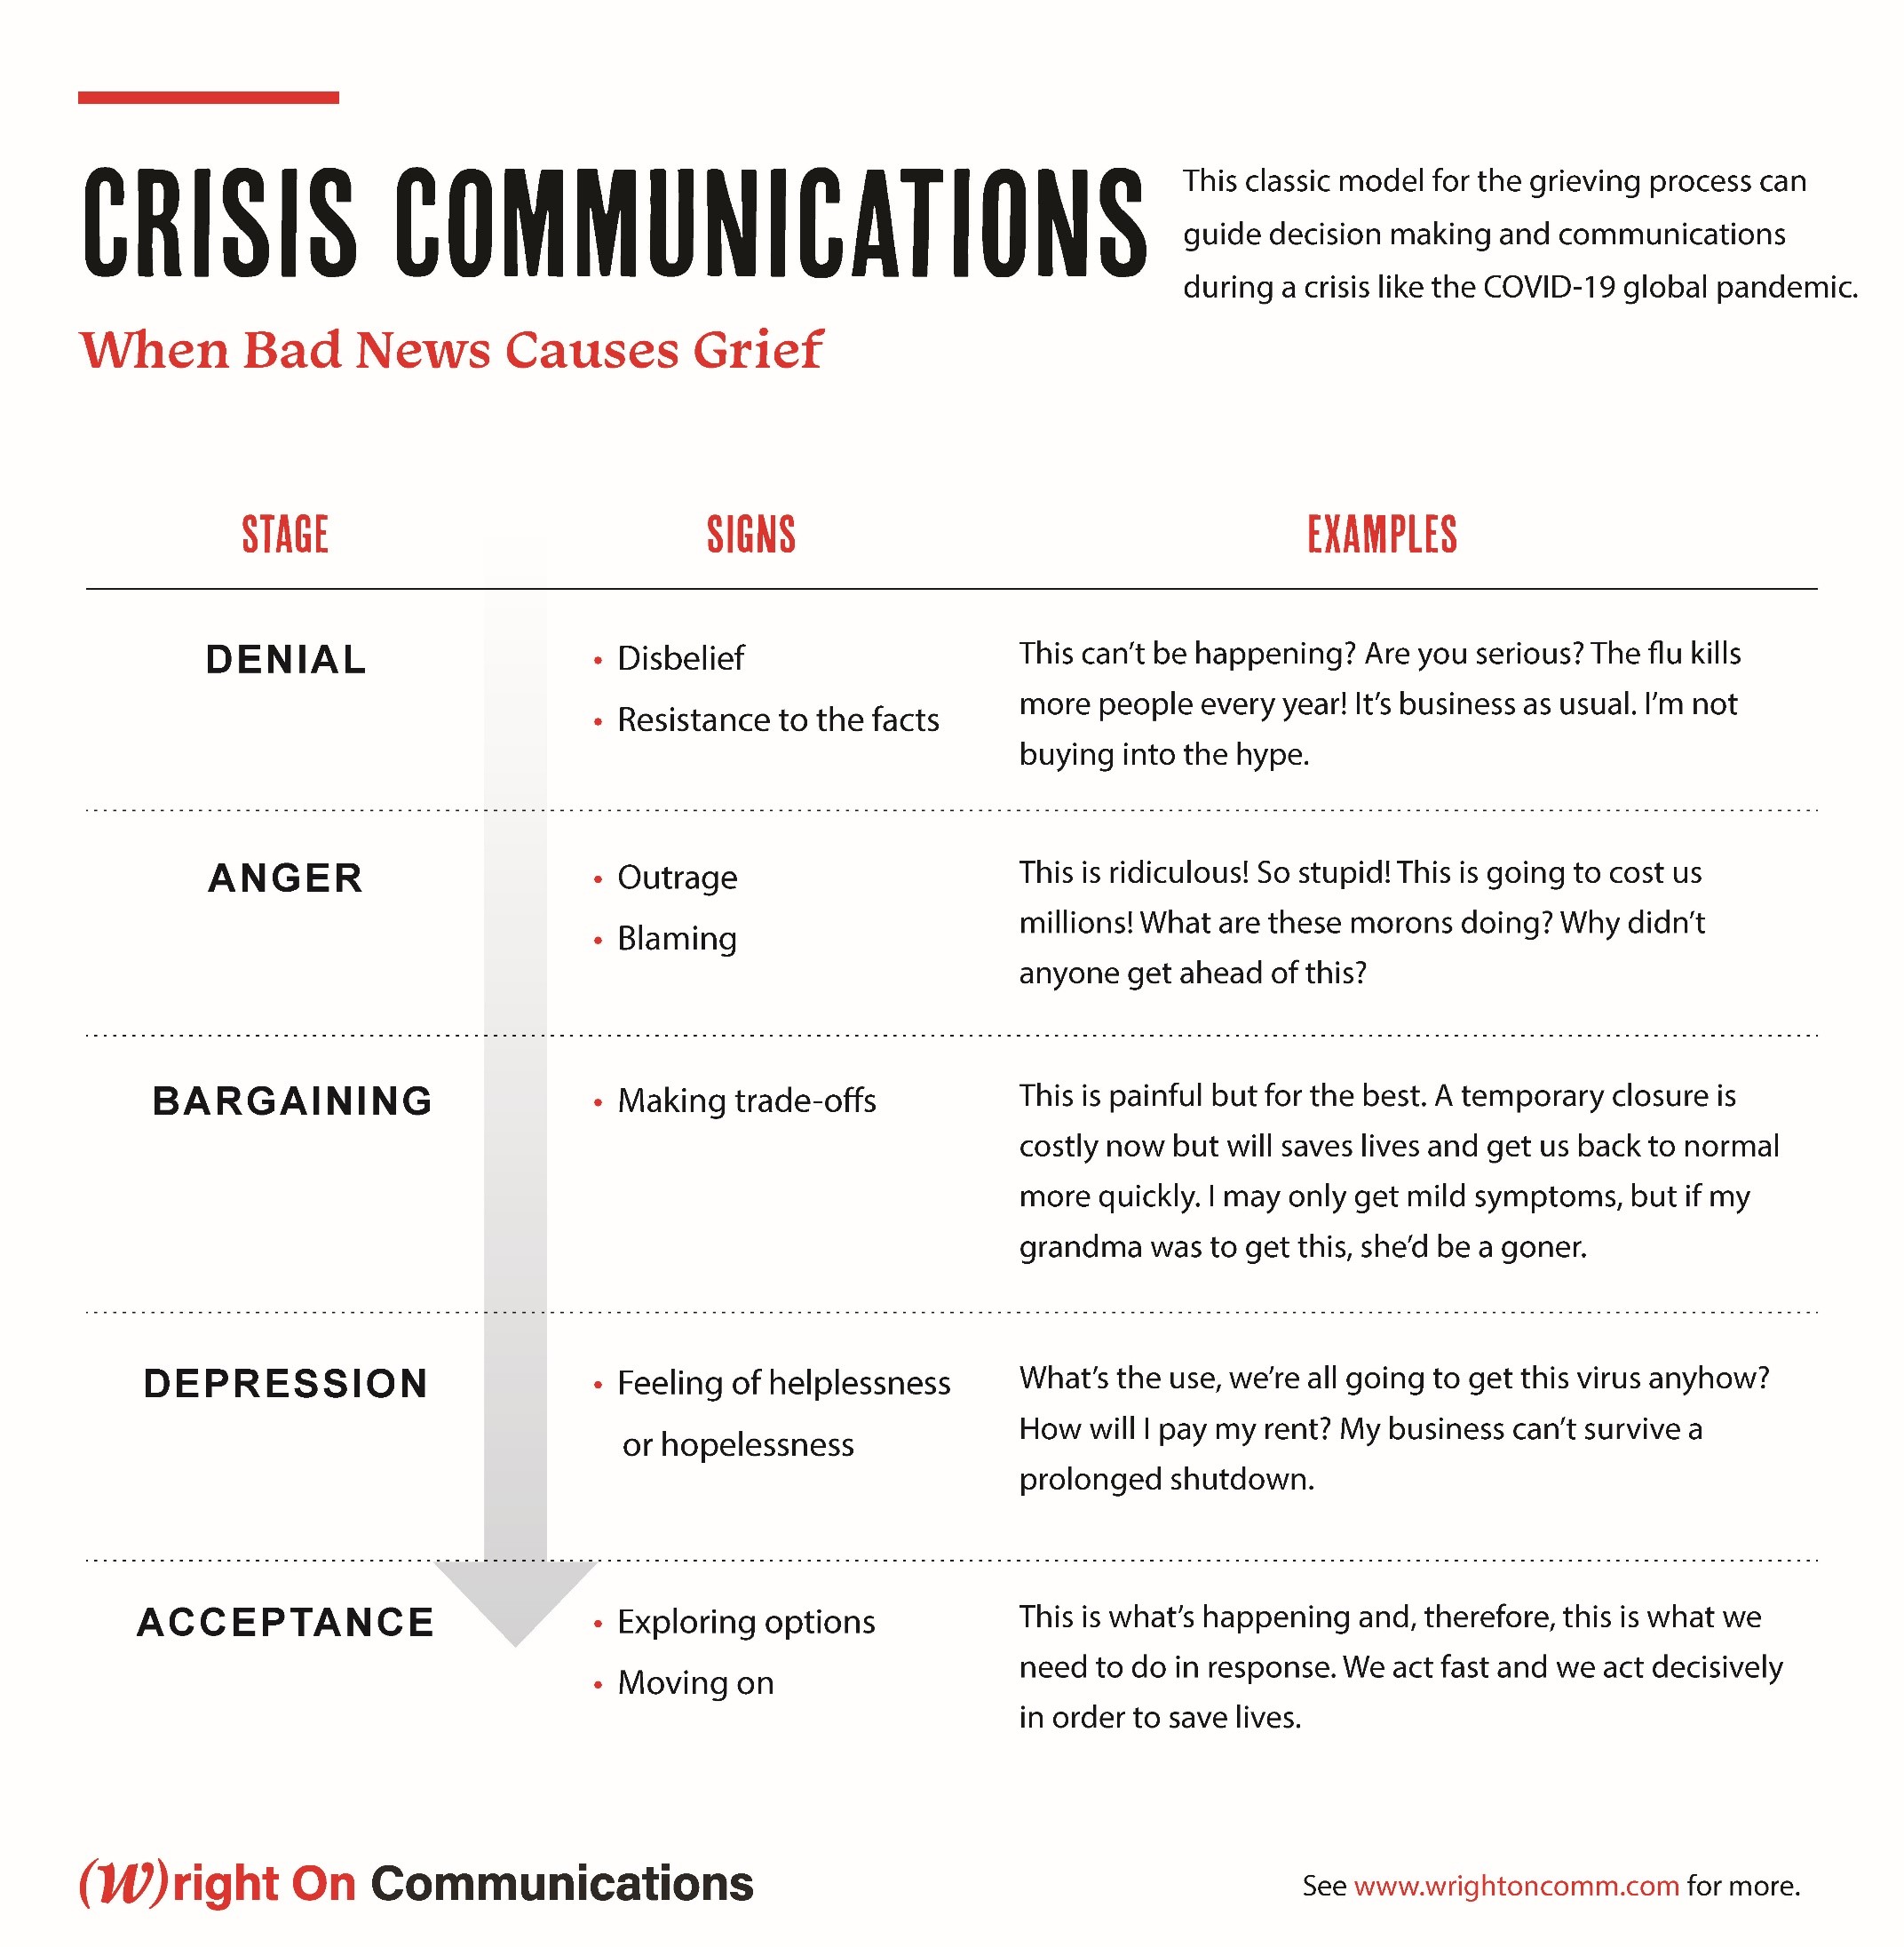 COVID-19 Crisis Communications grief model